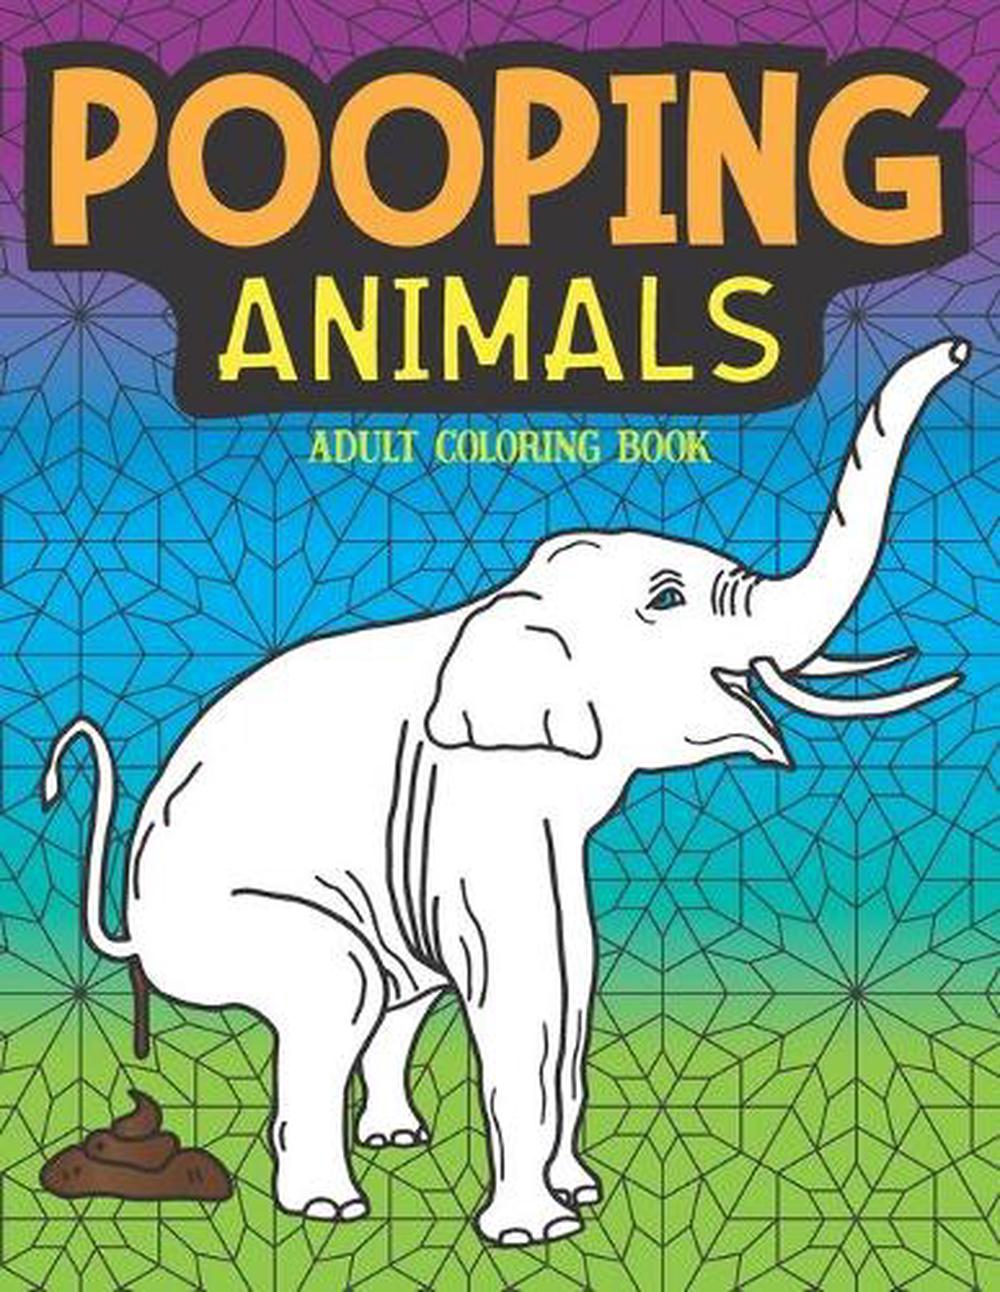 Download Pooping Animals Adult Coloring Book by the Farce Publishing What (English) Paper 9781643400310 ...